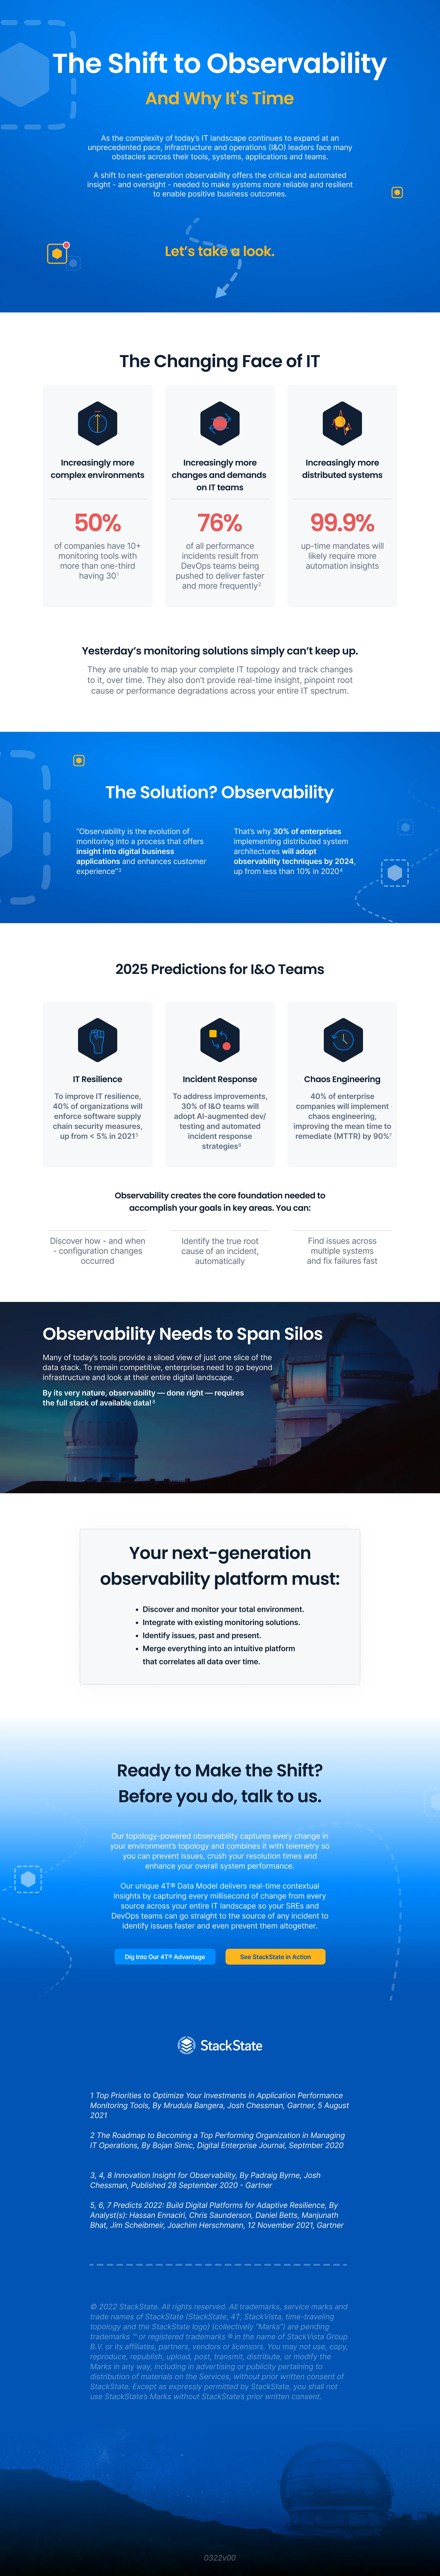 The Shift to Observability | Infographic